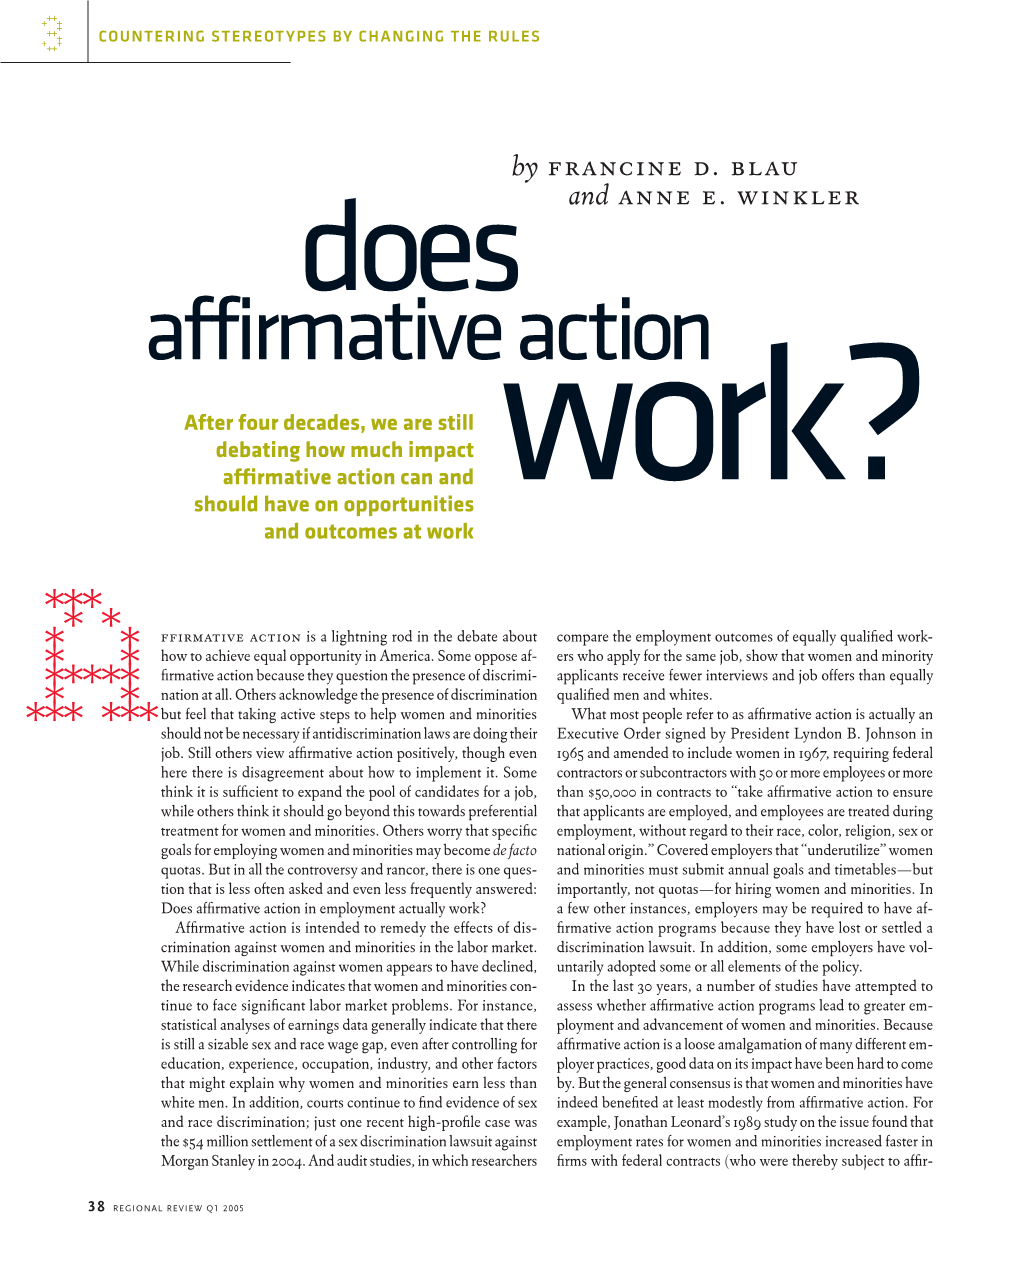 Does Affirmative Action Work?